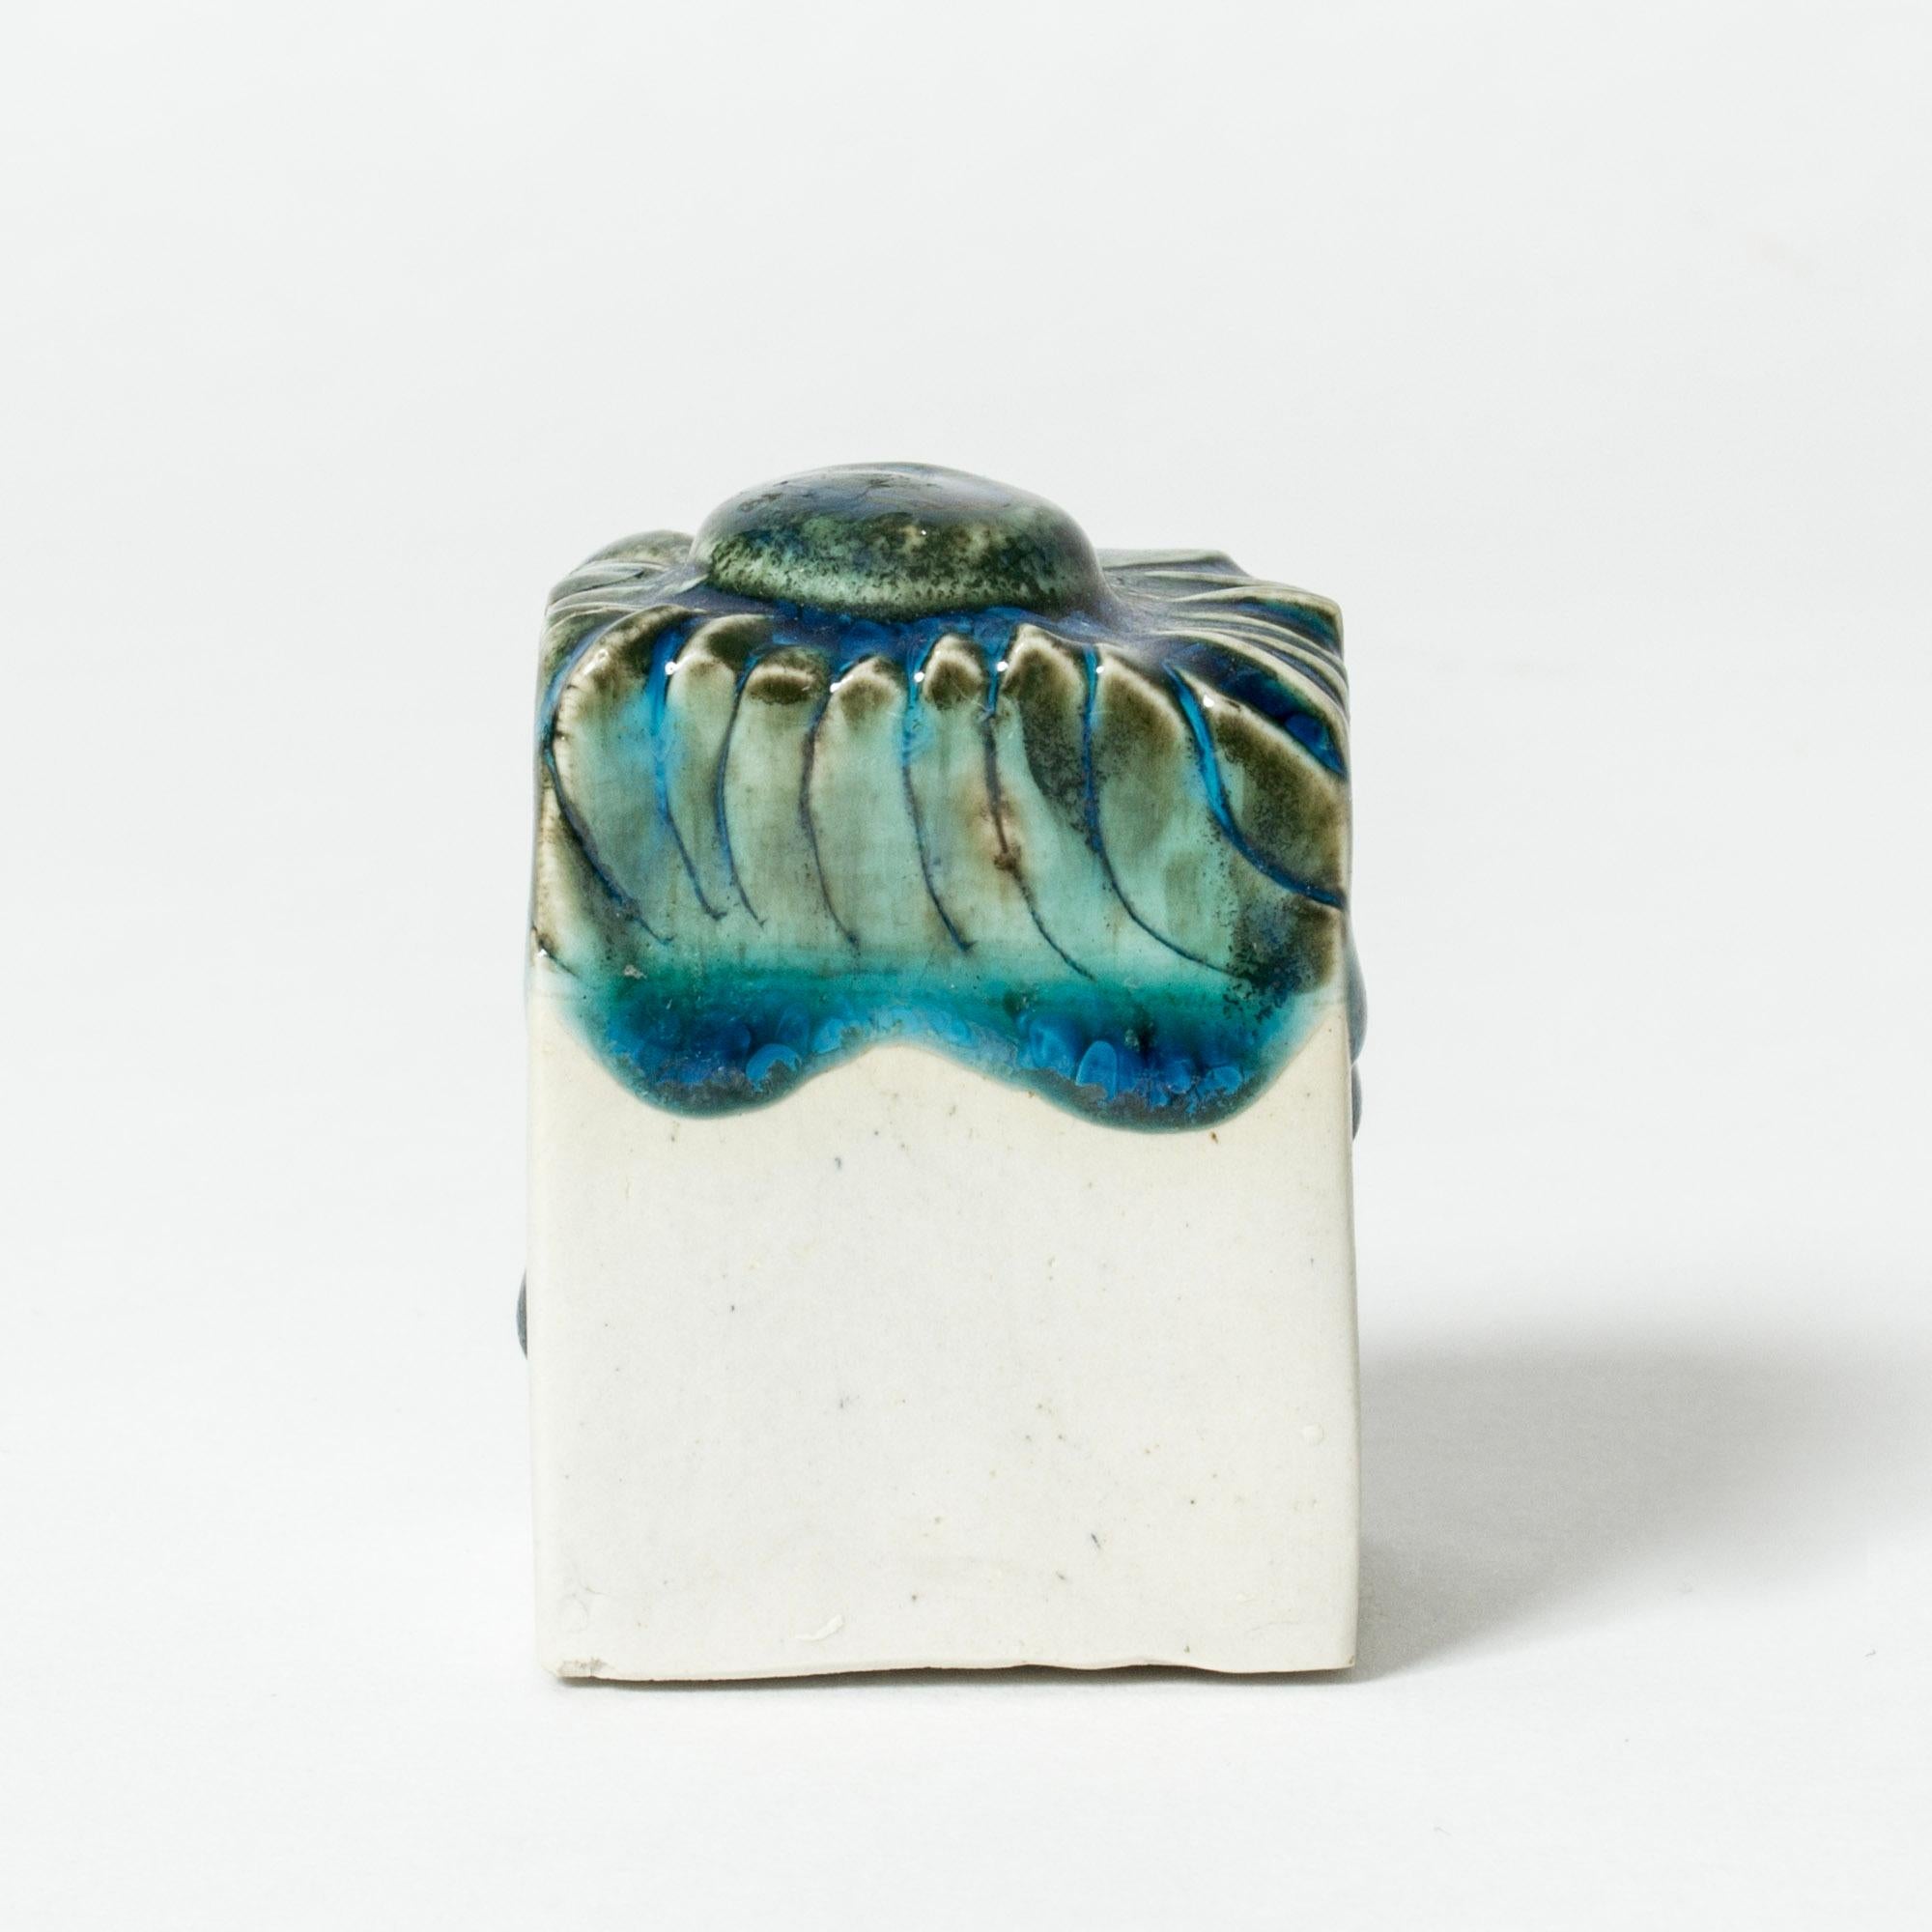 Small stoneware sculpture by Bengt Berglund in a cute, whimsical shape, ocean blue glaze on top, unglazed from the middle and down. 